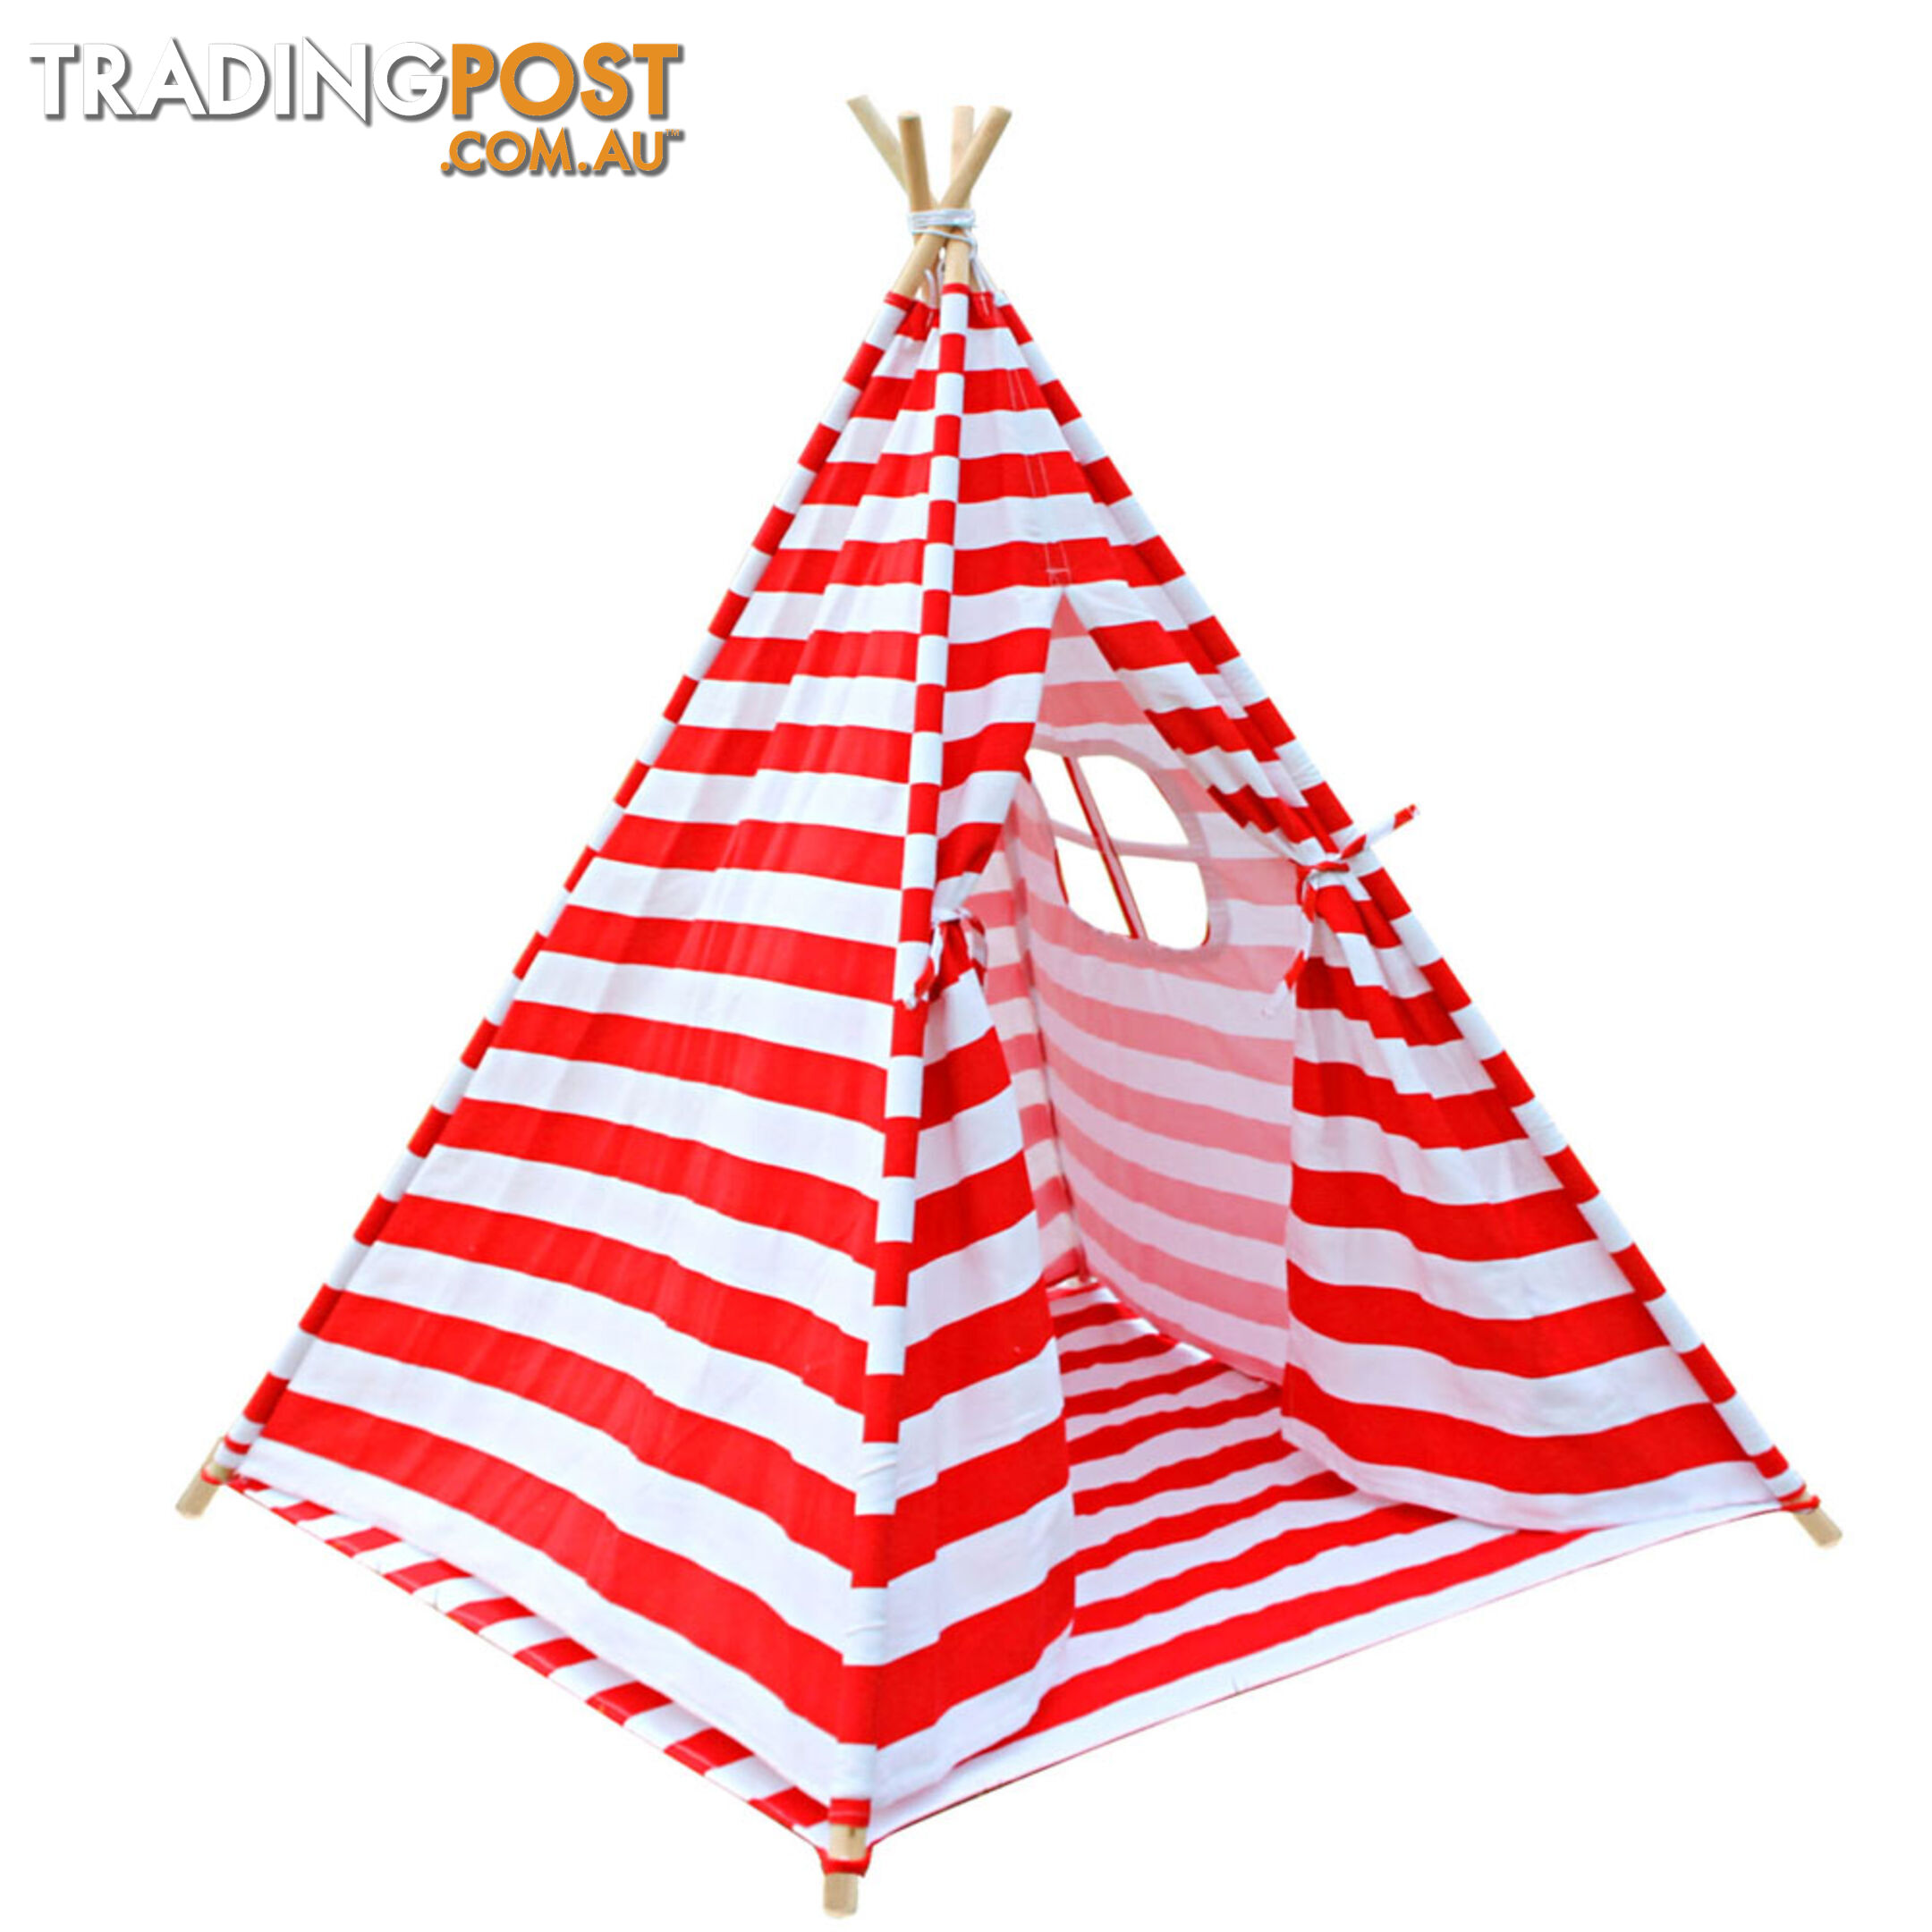 Kids Play Tent Children Canvas Teepee Pretend Playhouse Outdoor Indoor Tipi Red